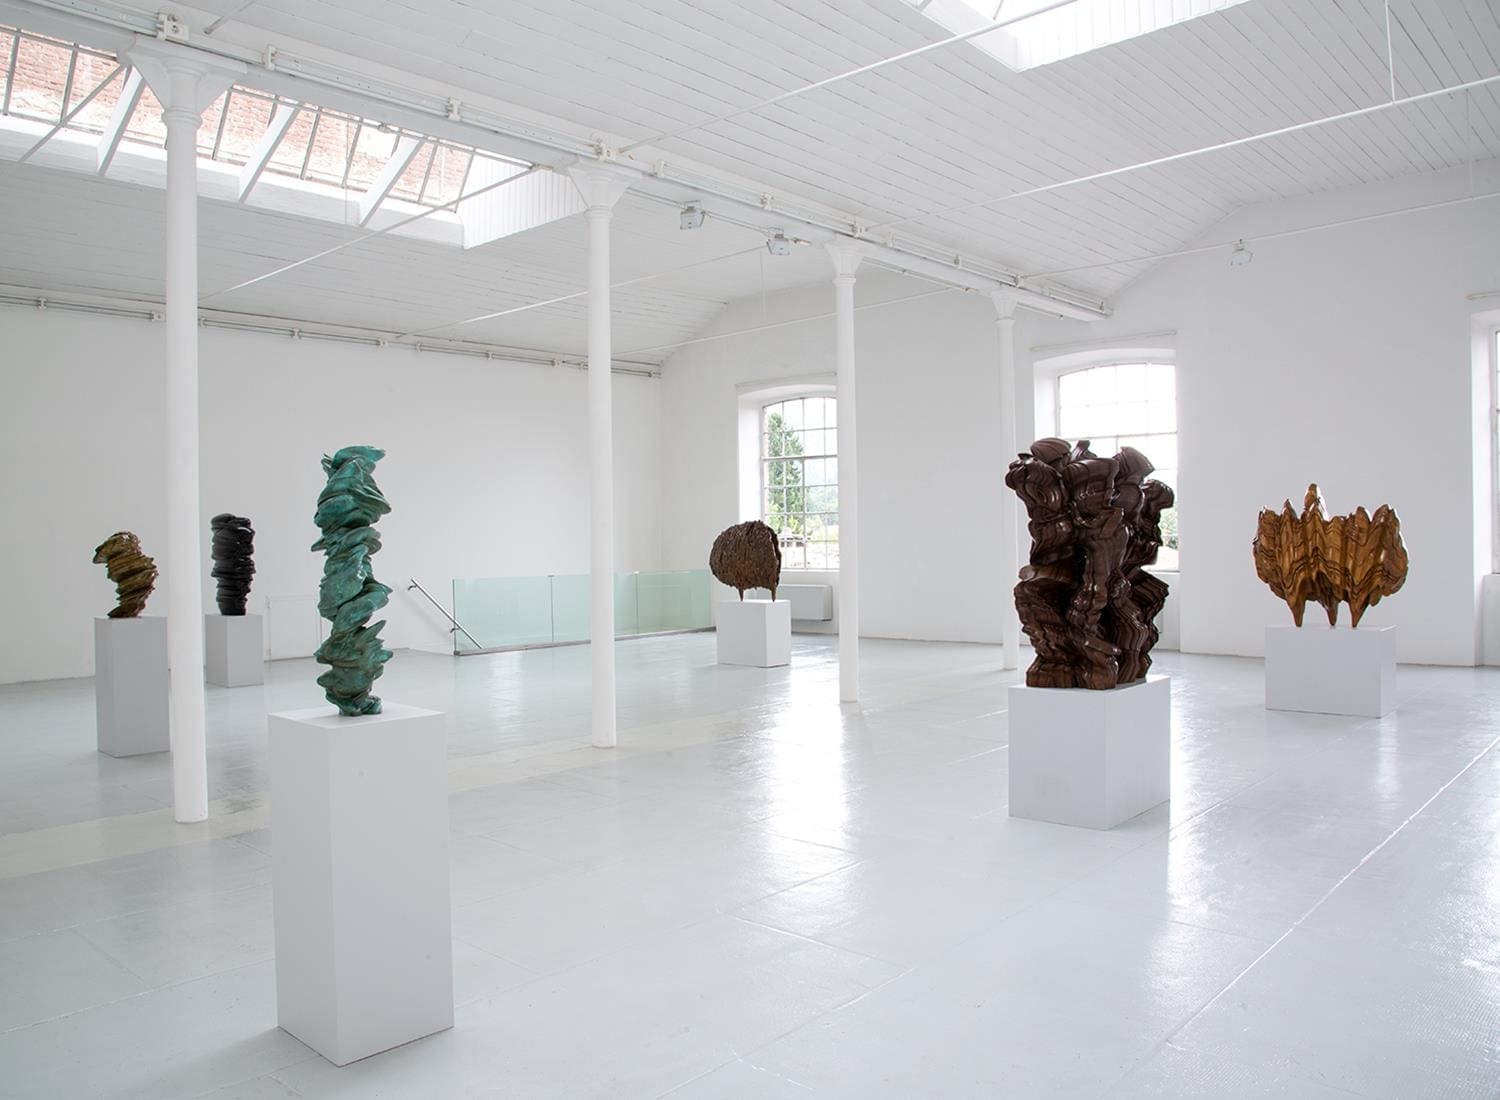 Tony Cragg. In no time